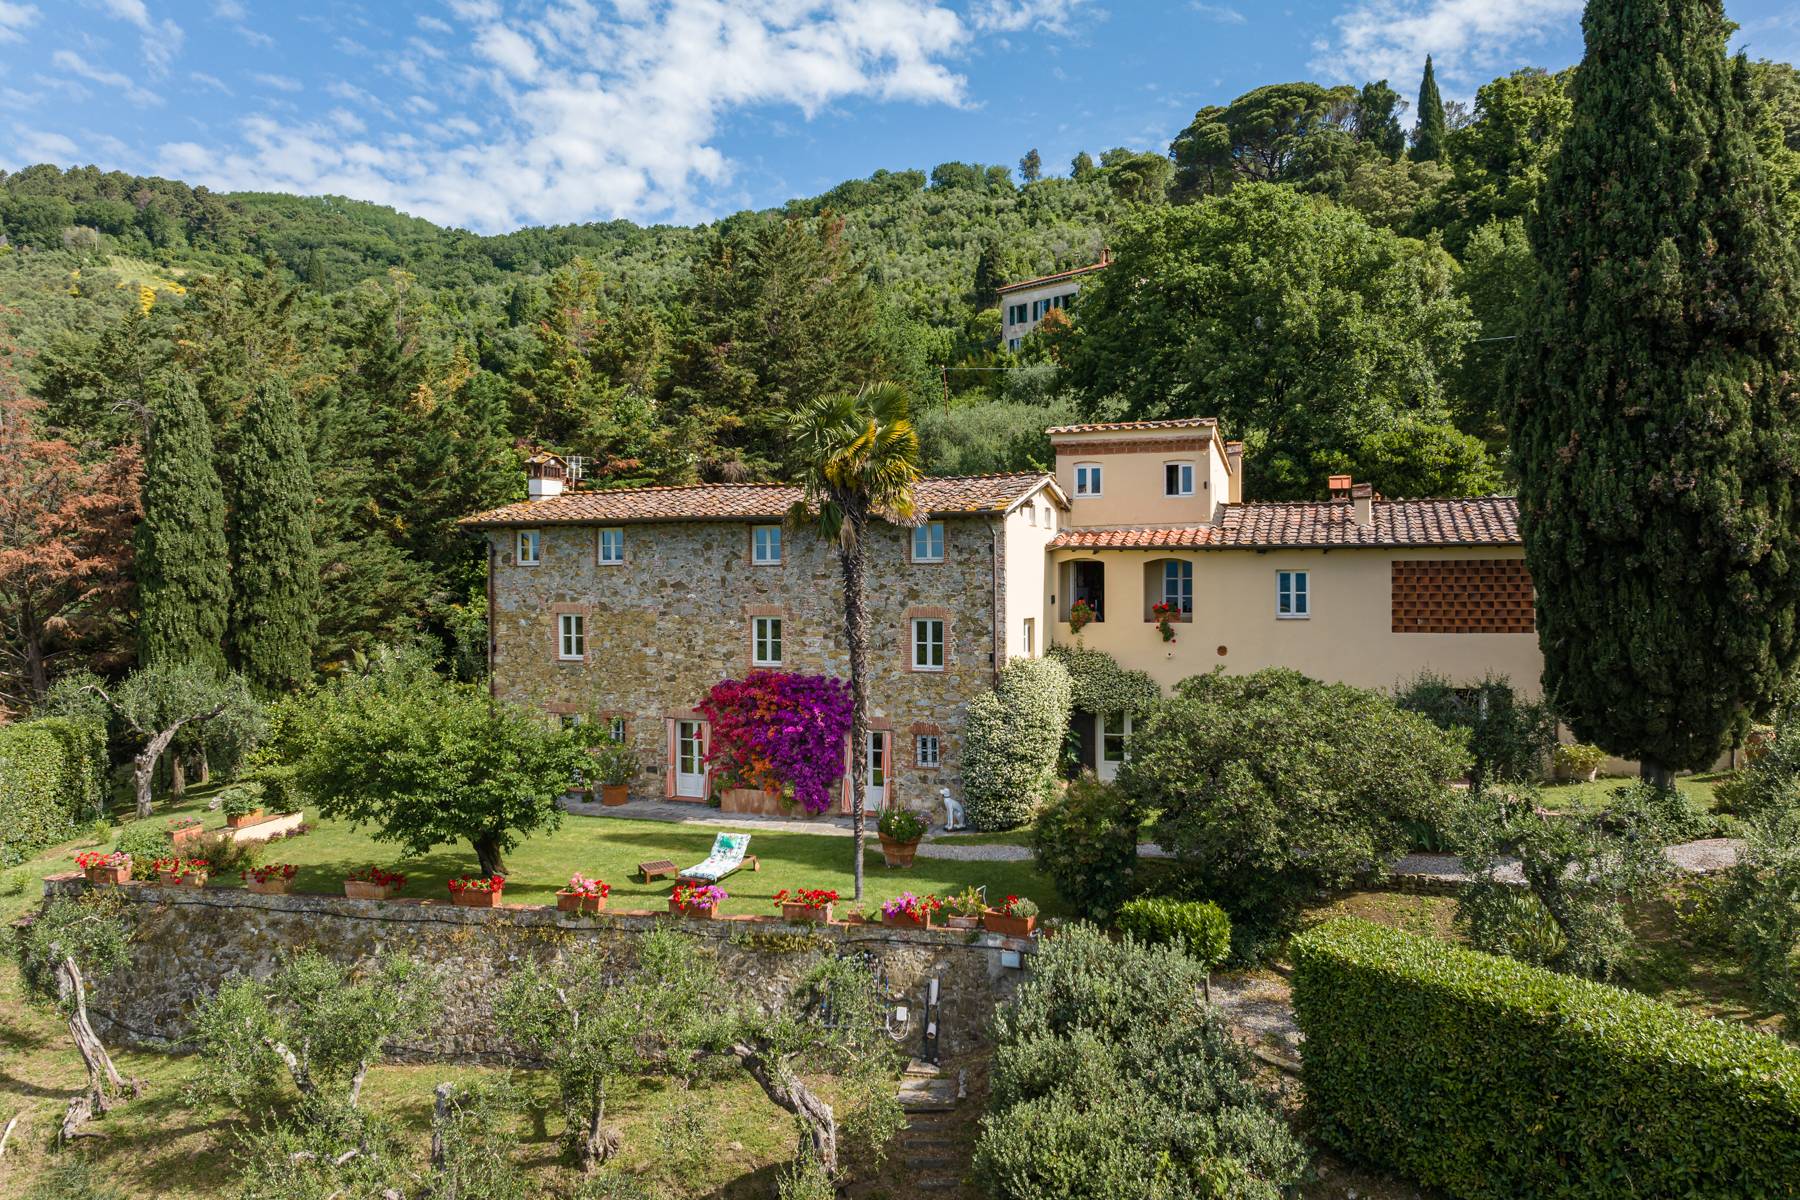 Elegant farmhouse with panoramic view over the hills of Lucca